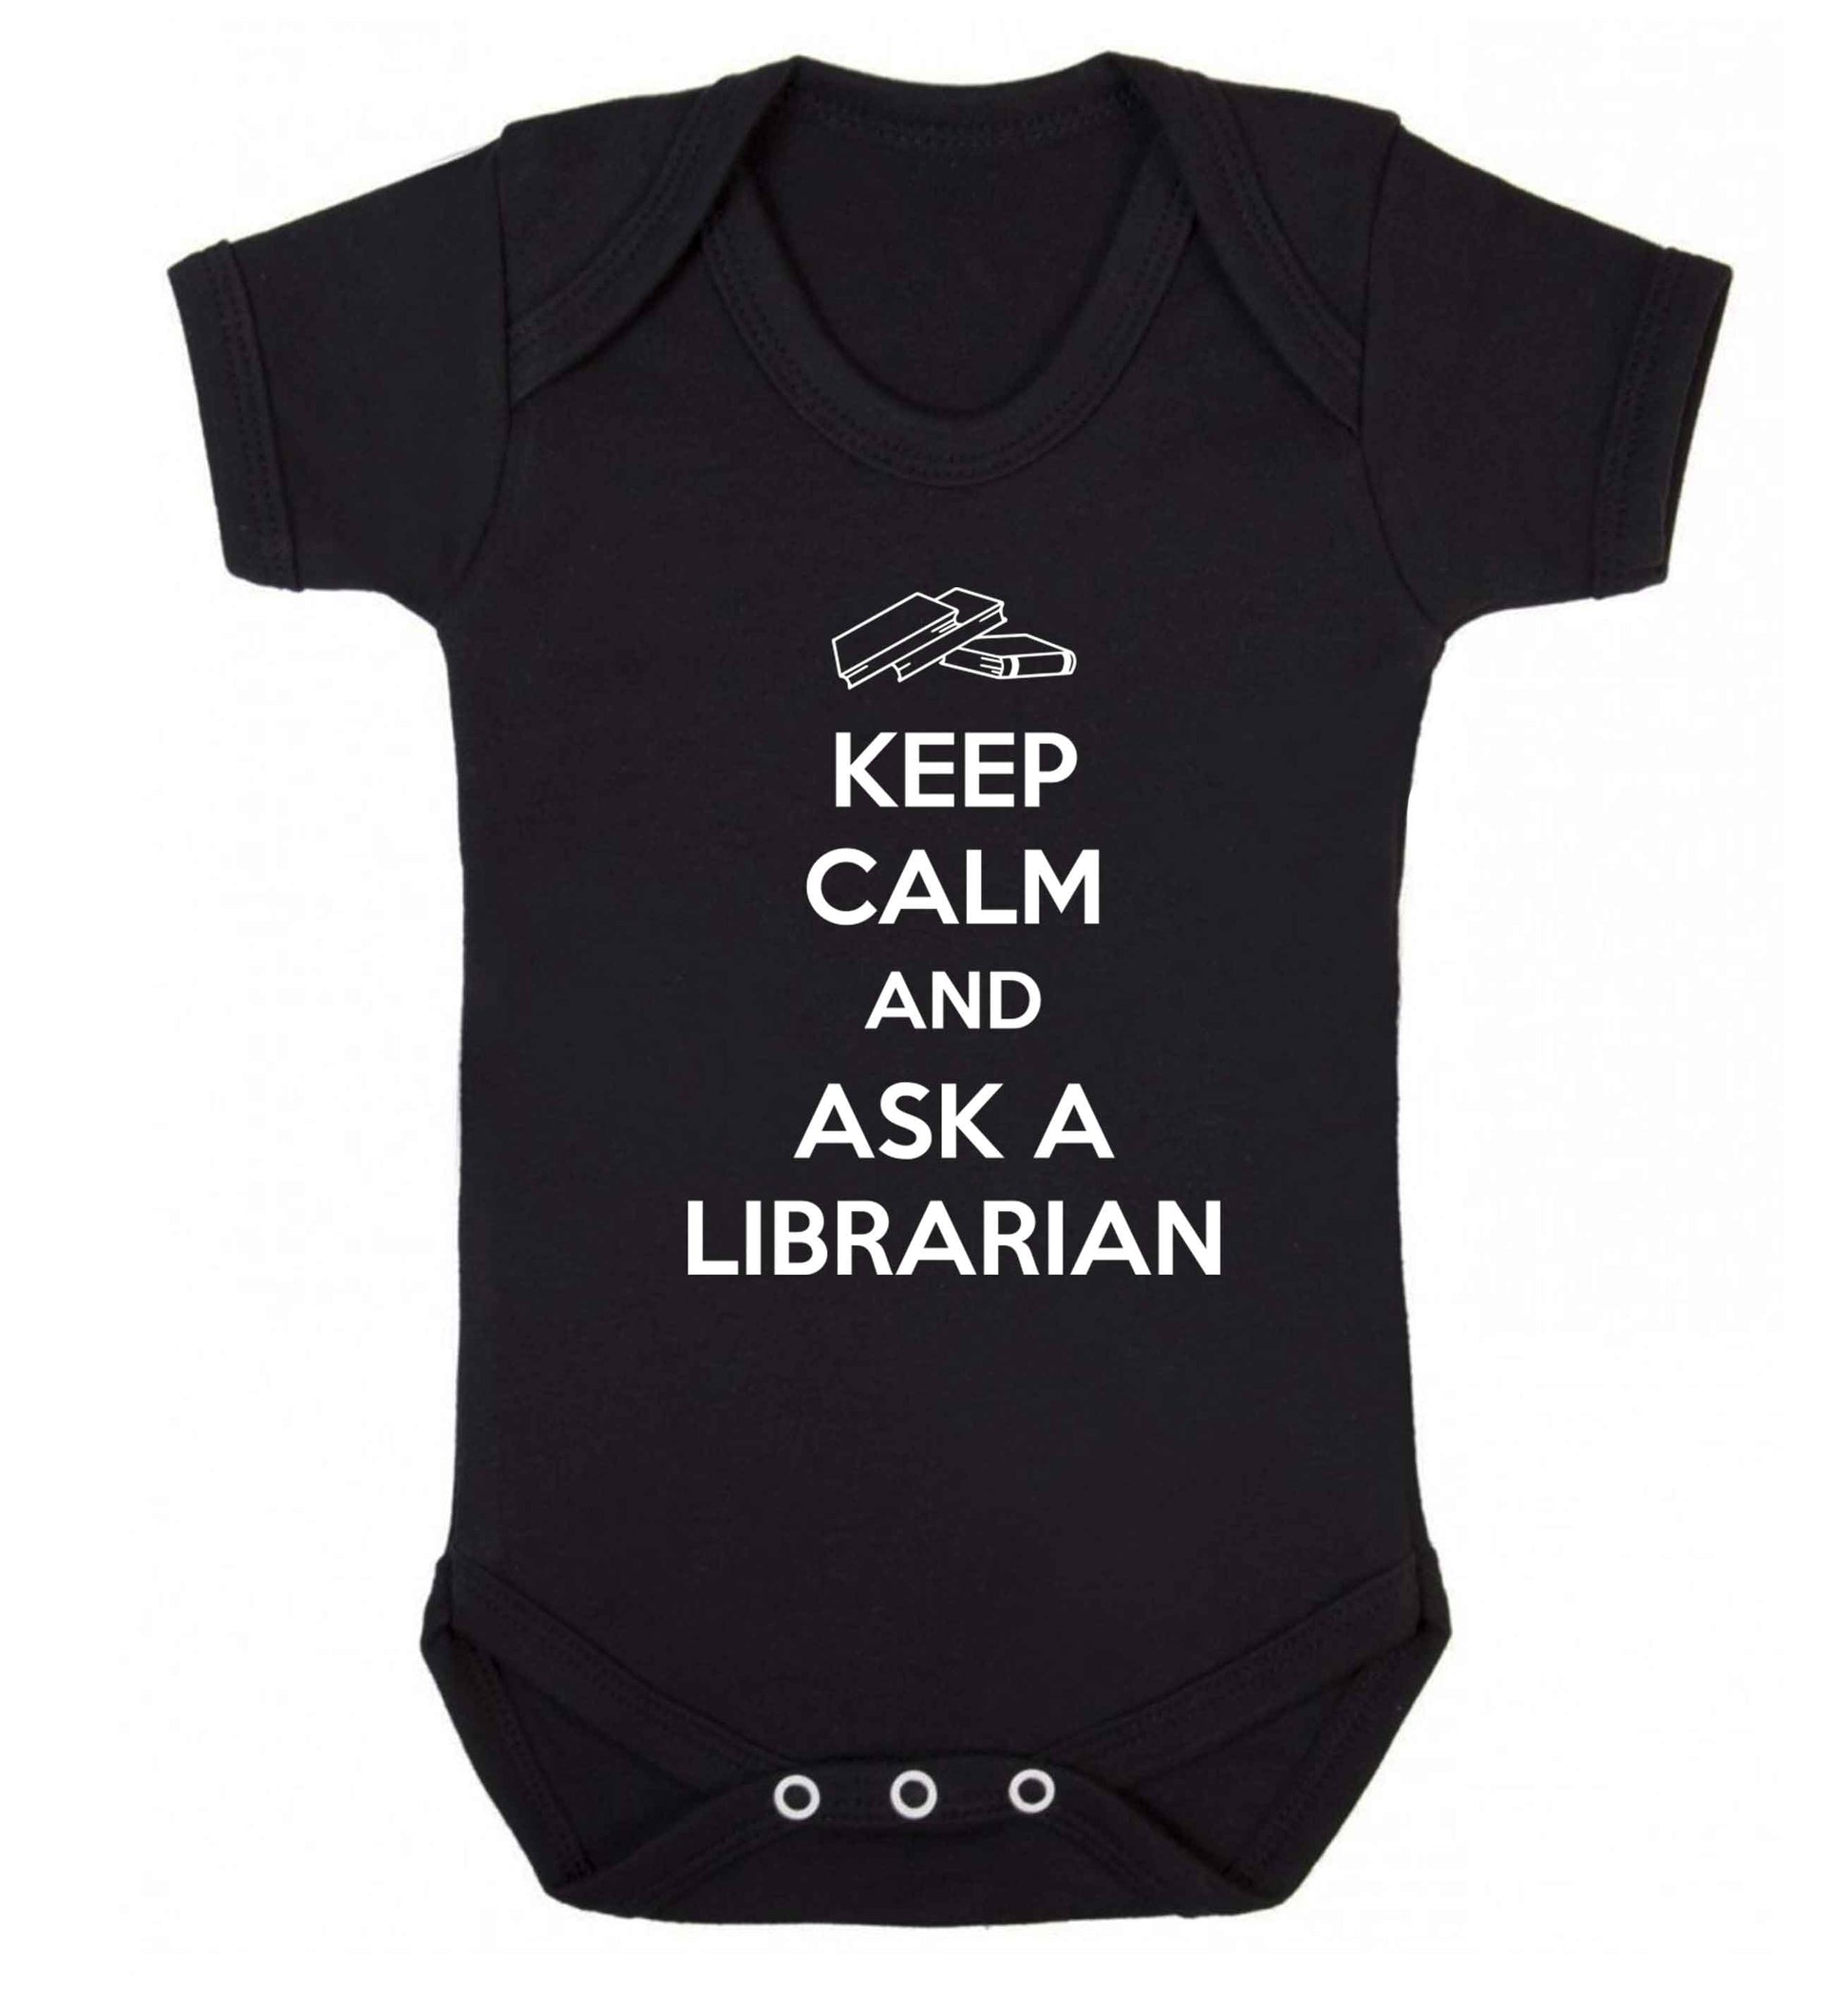 Keep calm and ask a librarian Baby Vest black 18-24 months